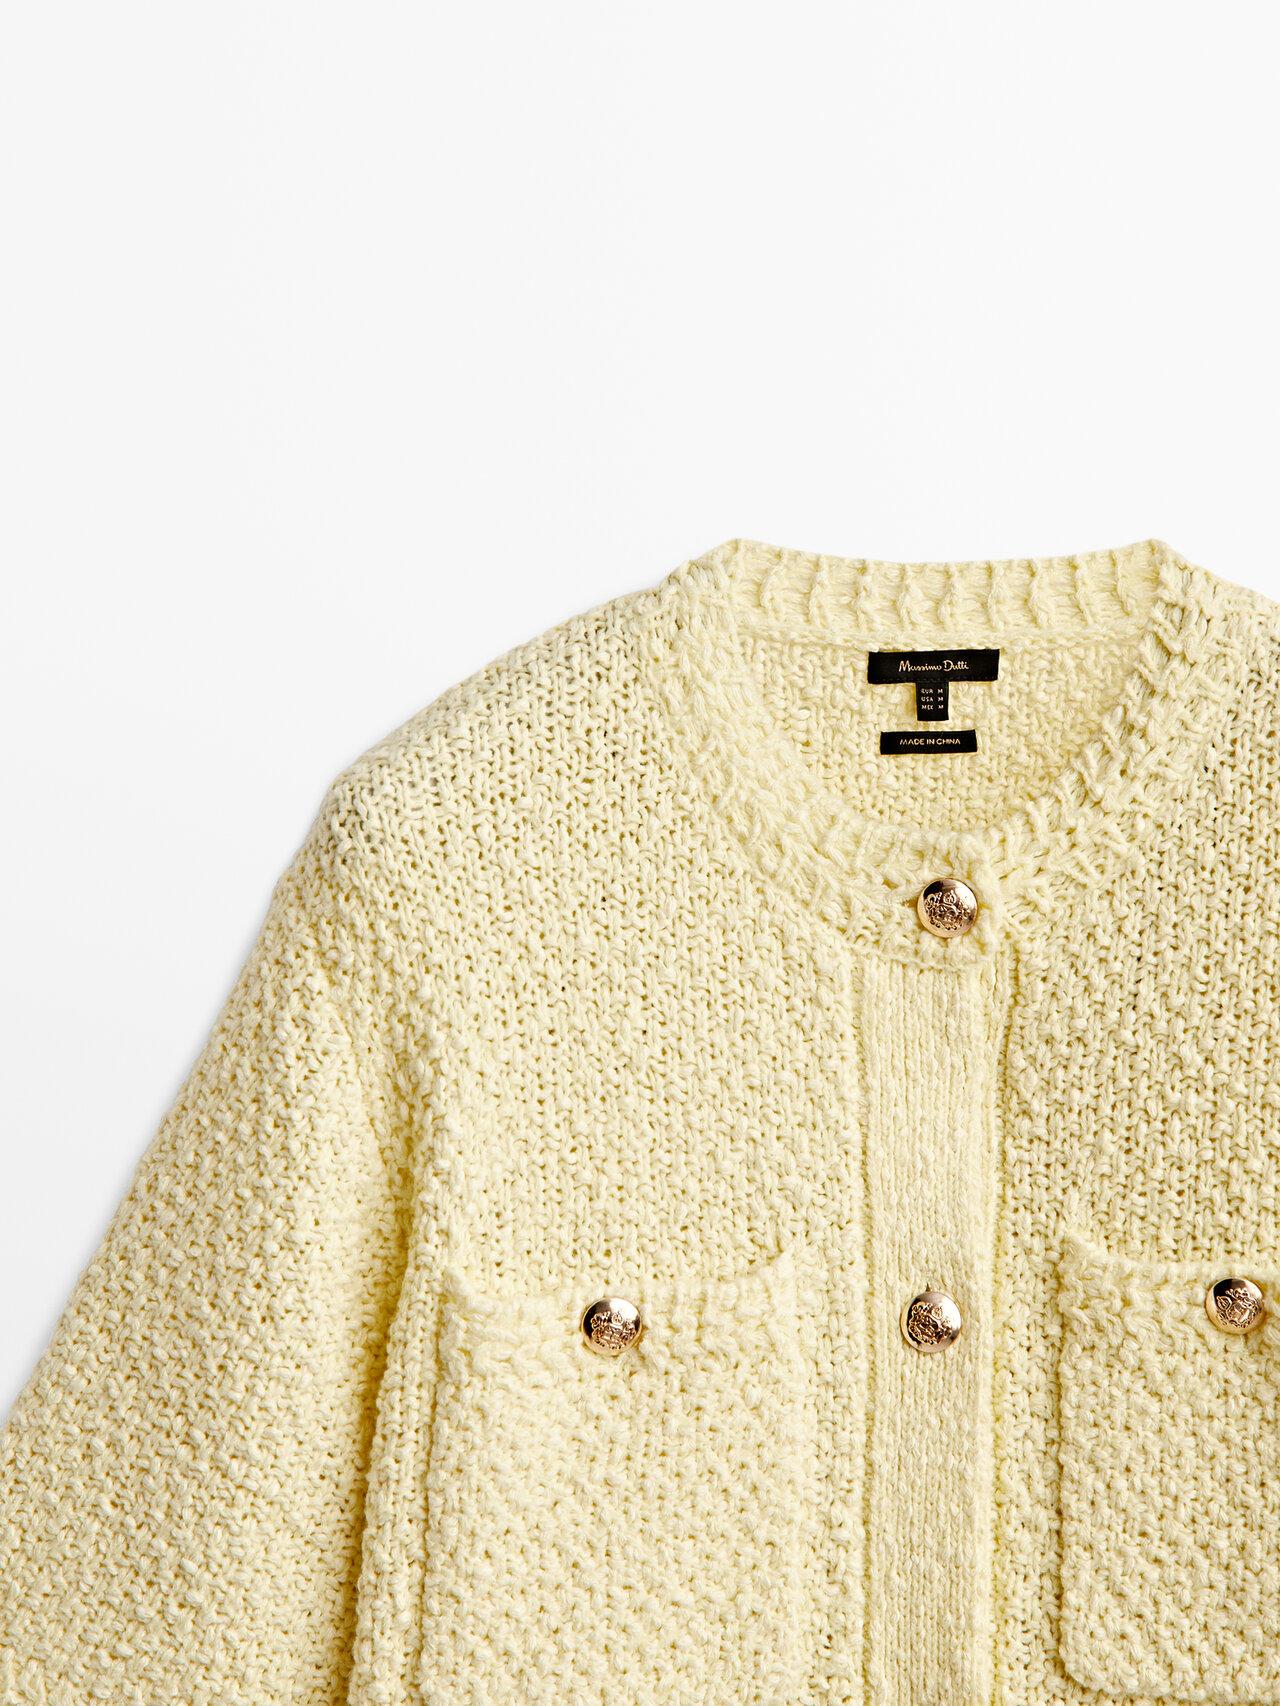 MASSIMO DUTTI Short Sleeve Knit Cardigan With Pockets in Natural | Lyst